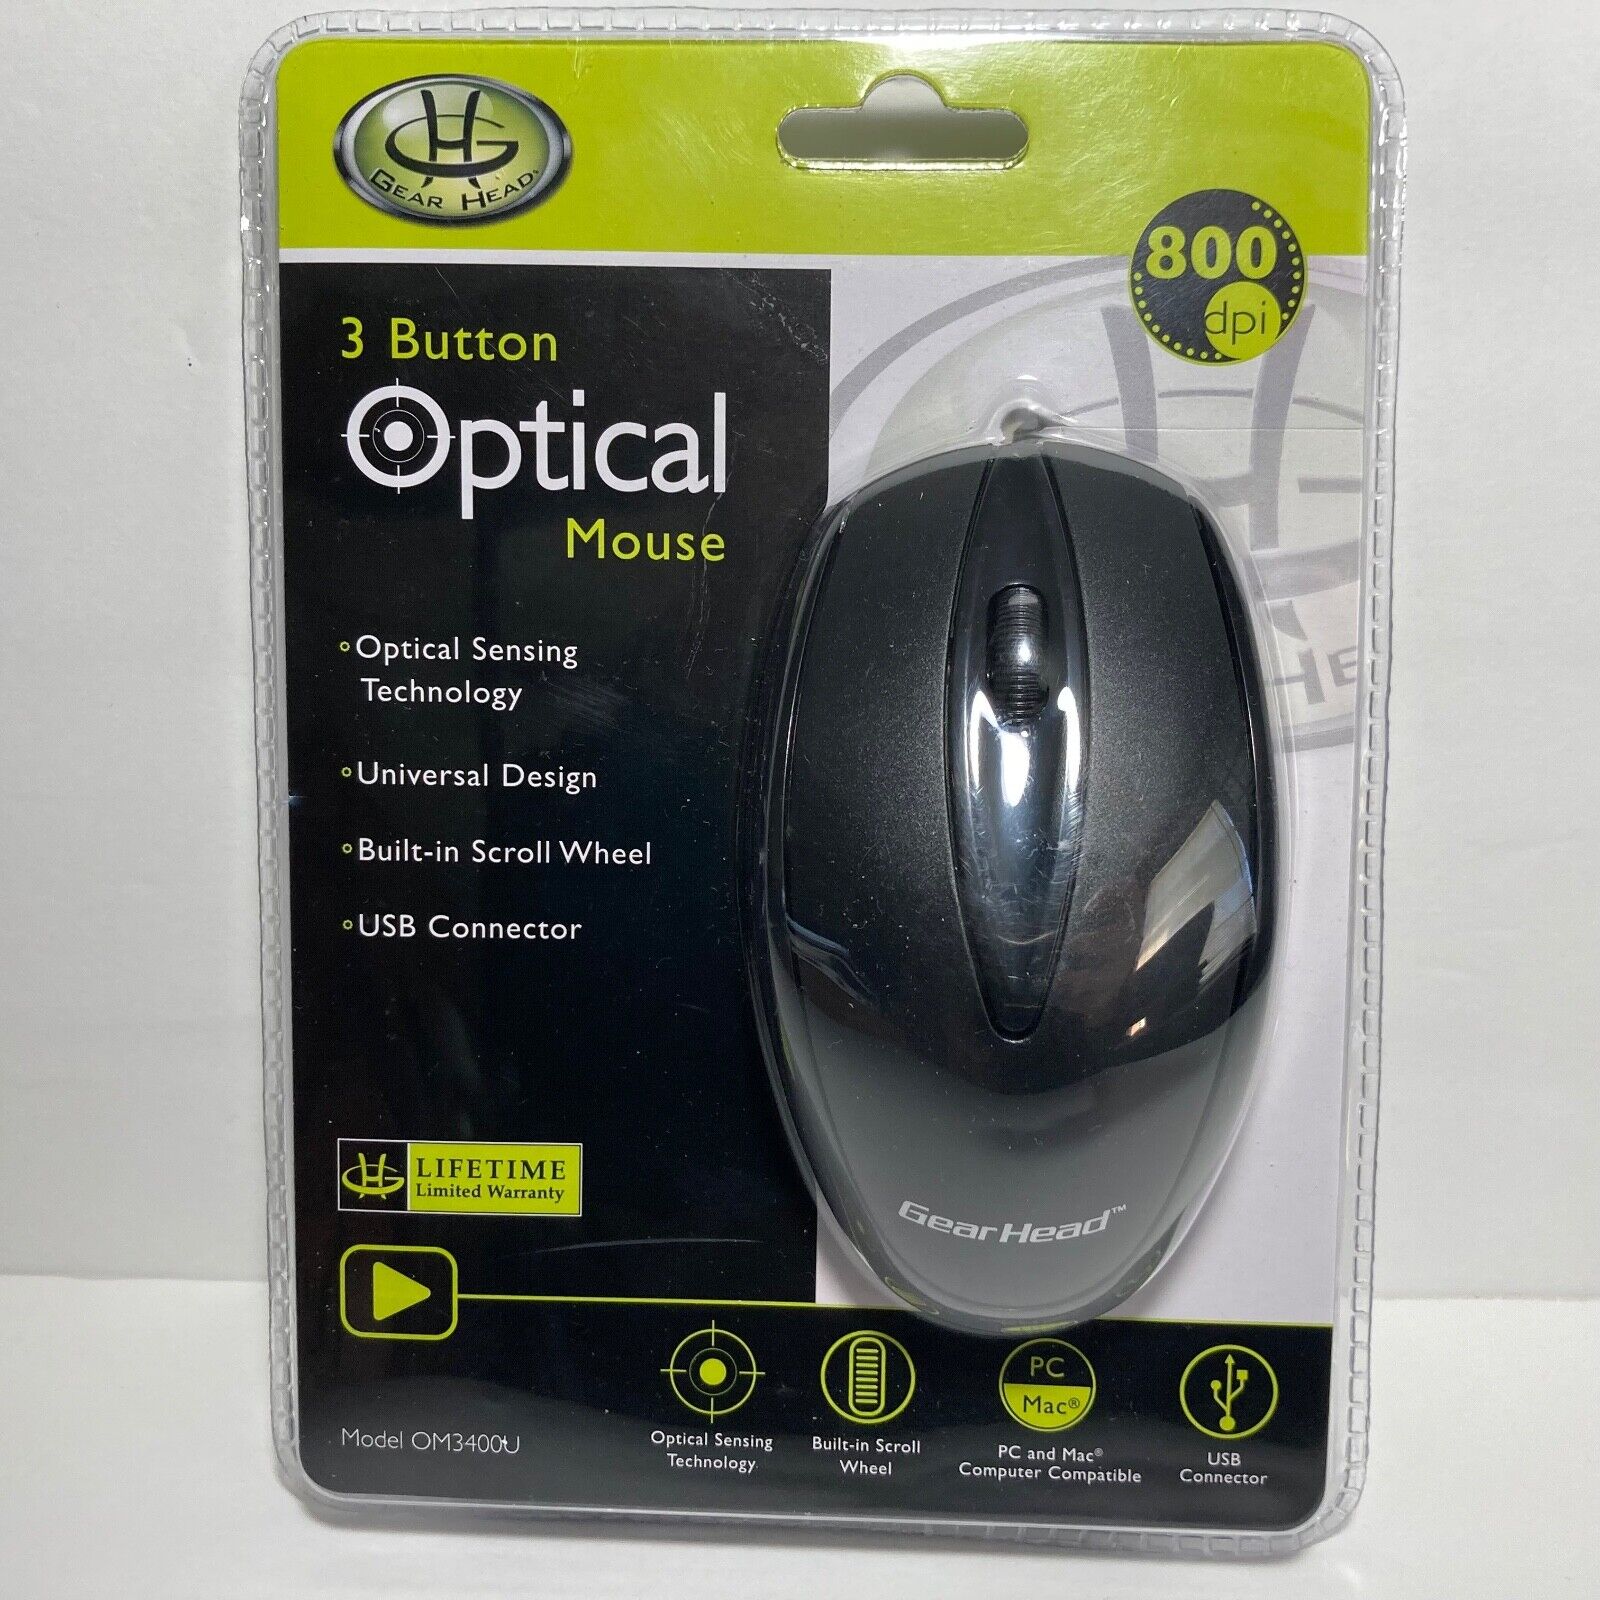 Gear Head OM3400U 3 Button Optical Standard USB Wired Mouse NEW Sealed